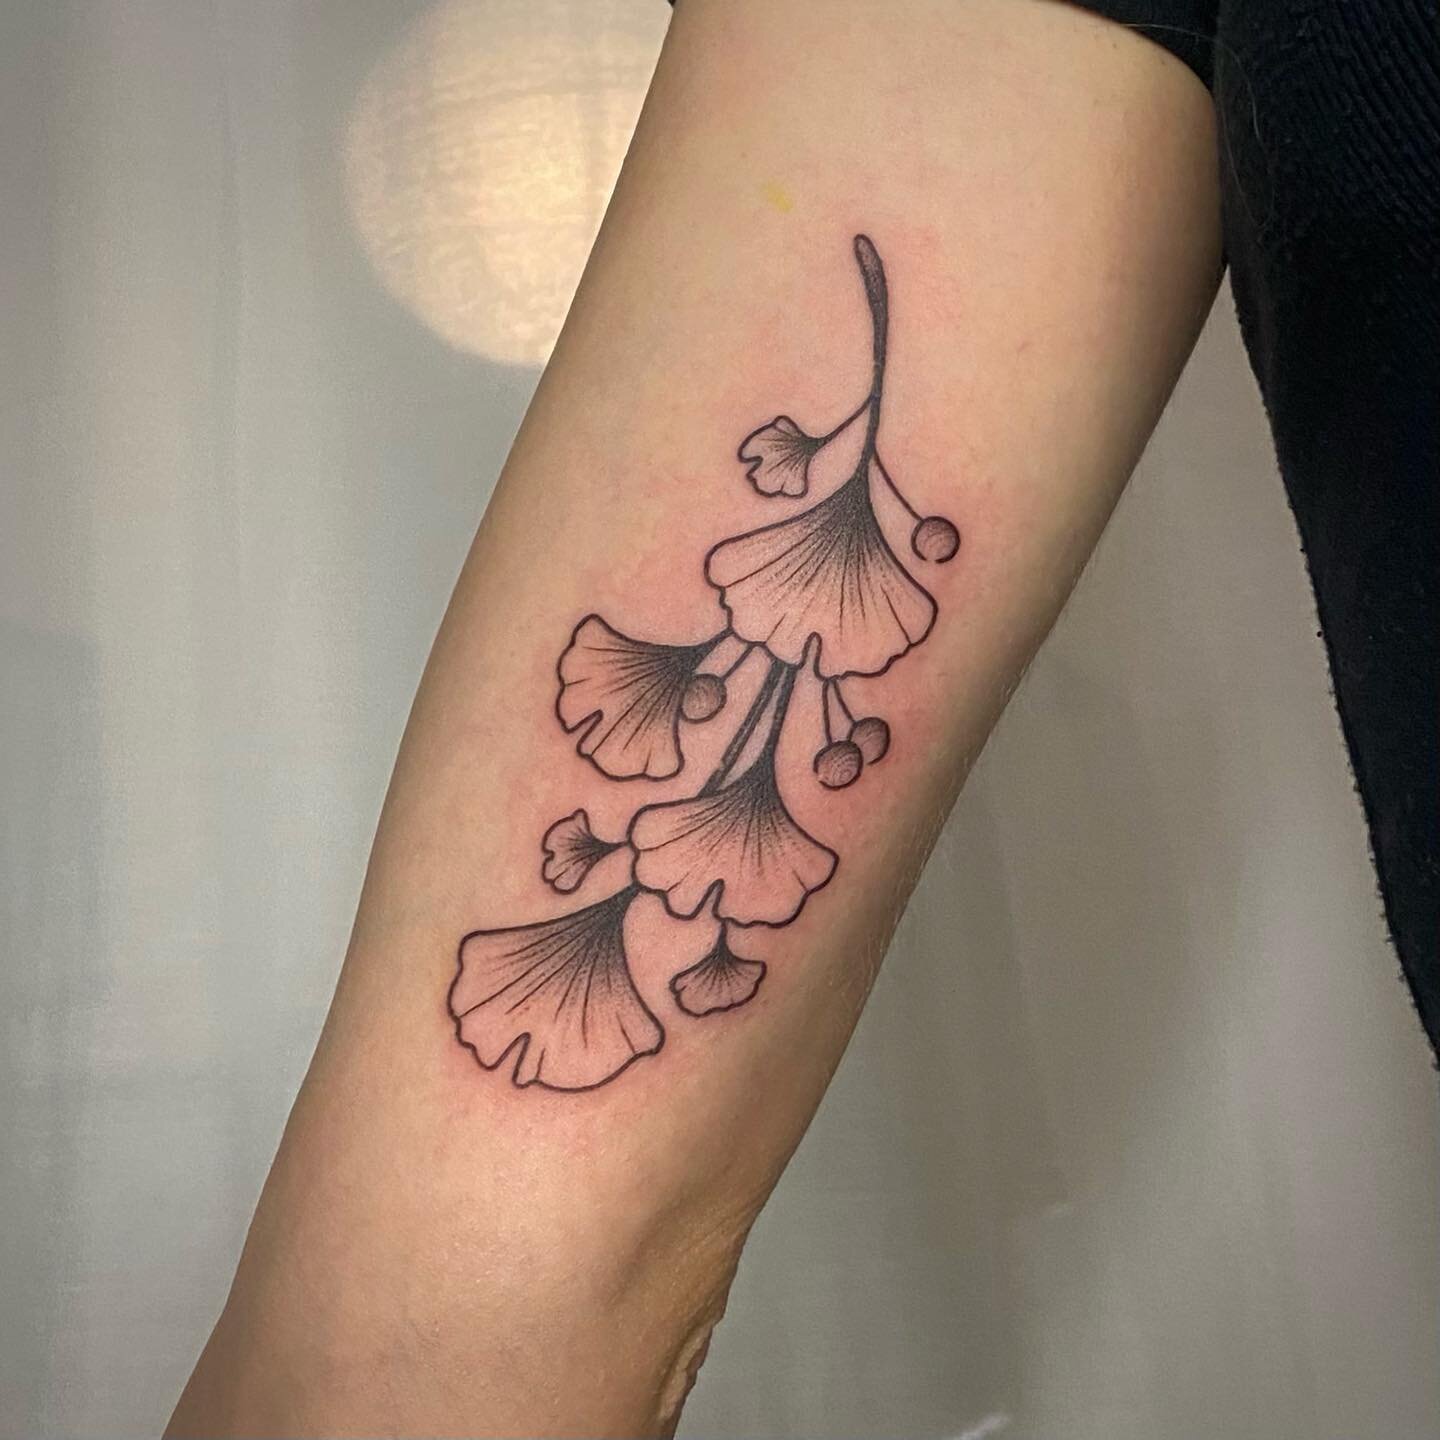 Freehand ginkgo branch for K, swipe to see the drawing ☺️ Tysm for your trust!! Always down for ginkgoes even if I&rsquo;m in a flash only phase 💚

Gonna start trying to get back to Toronto (June 3+6) bookings this evening, this is your last few hou